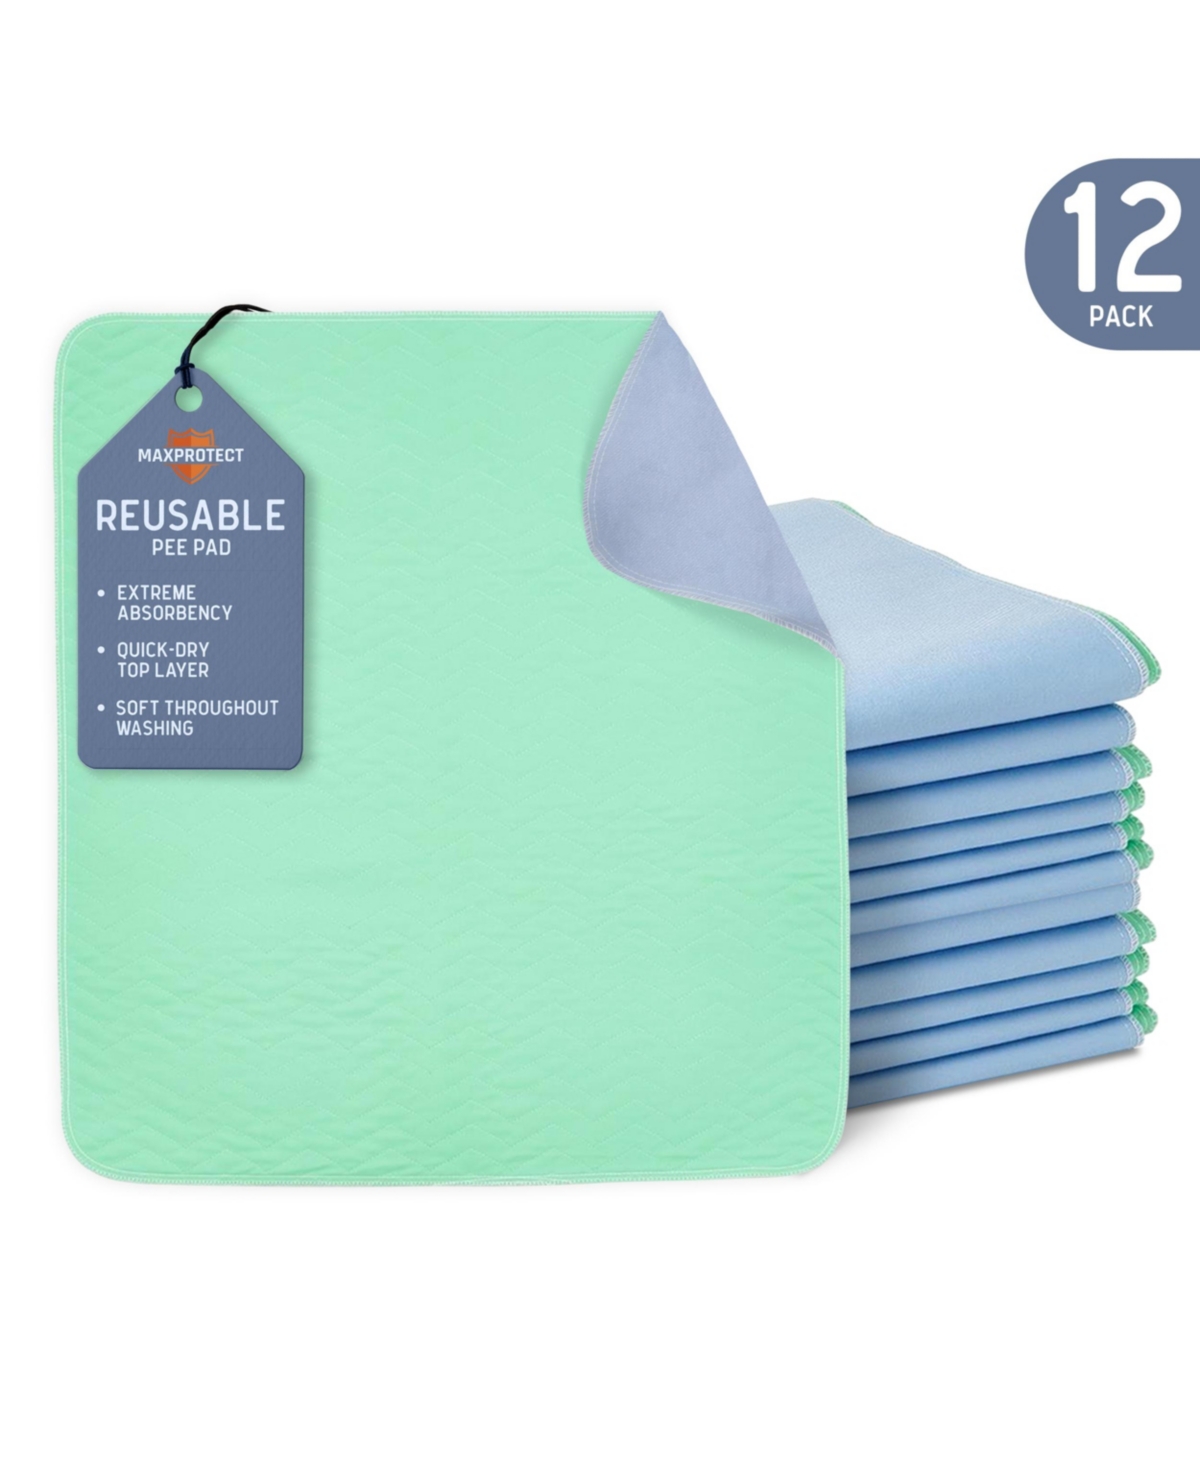 MaxProtect Quick-Dry Reusable Pee Pads for Dogs, Training Underpads, Maximum Absorbency - 12 Pack, 34" x 36" - Bright Green, Blue